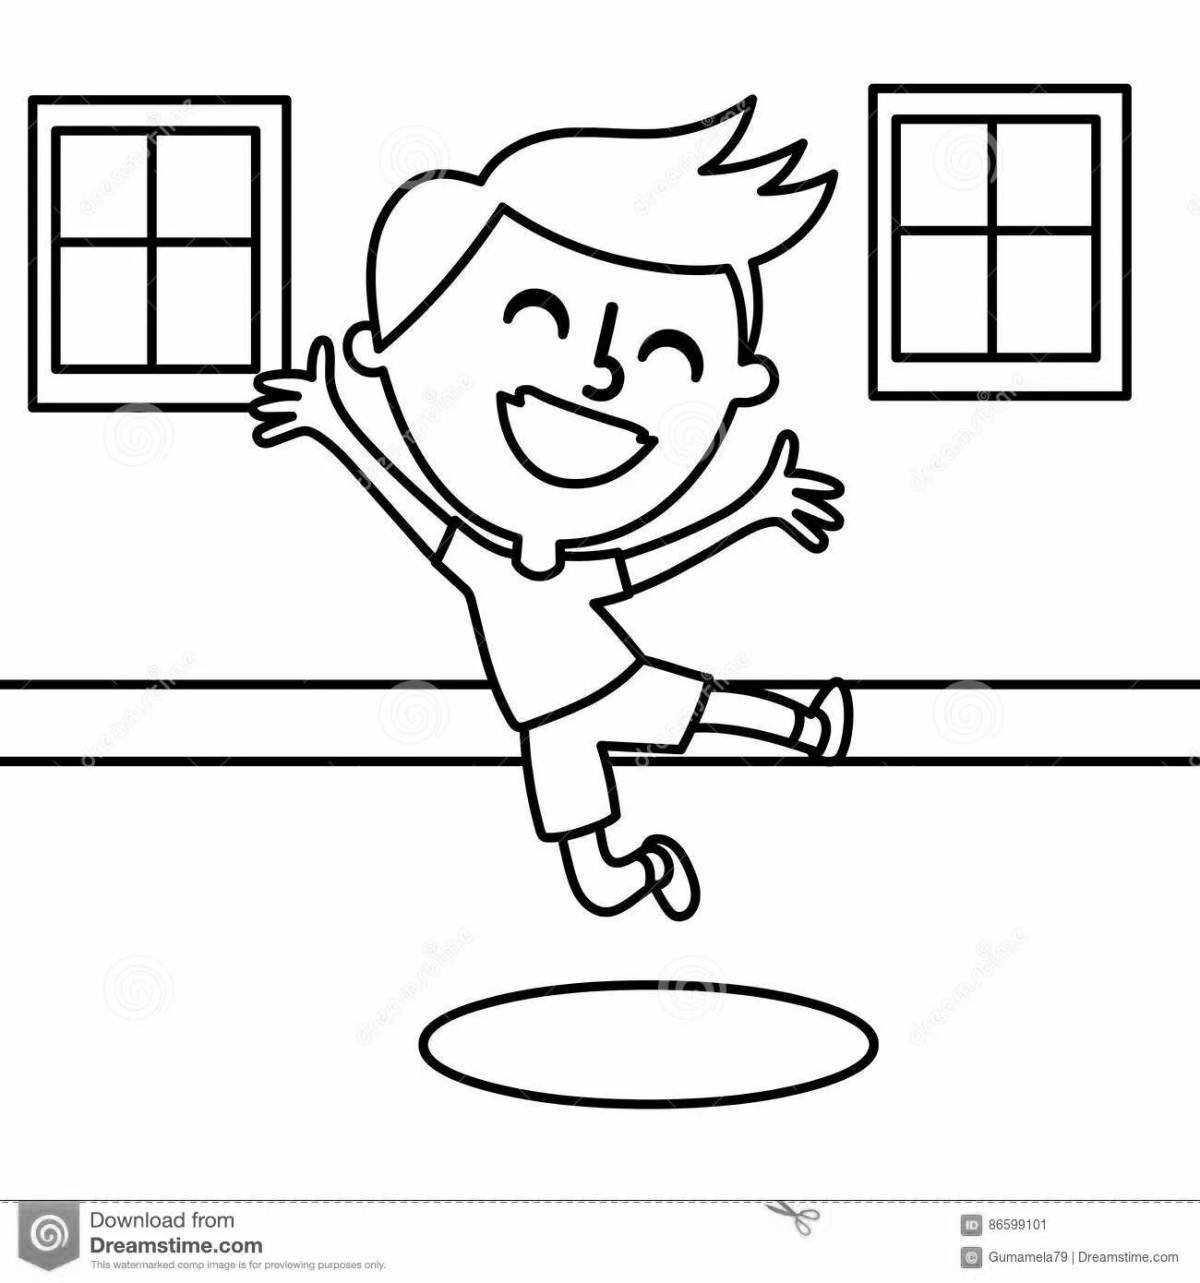 Coloring page energetic jumping